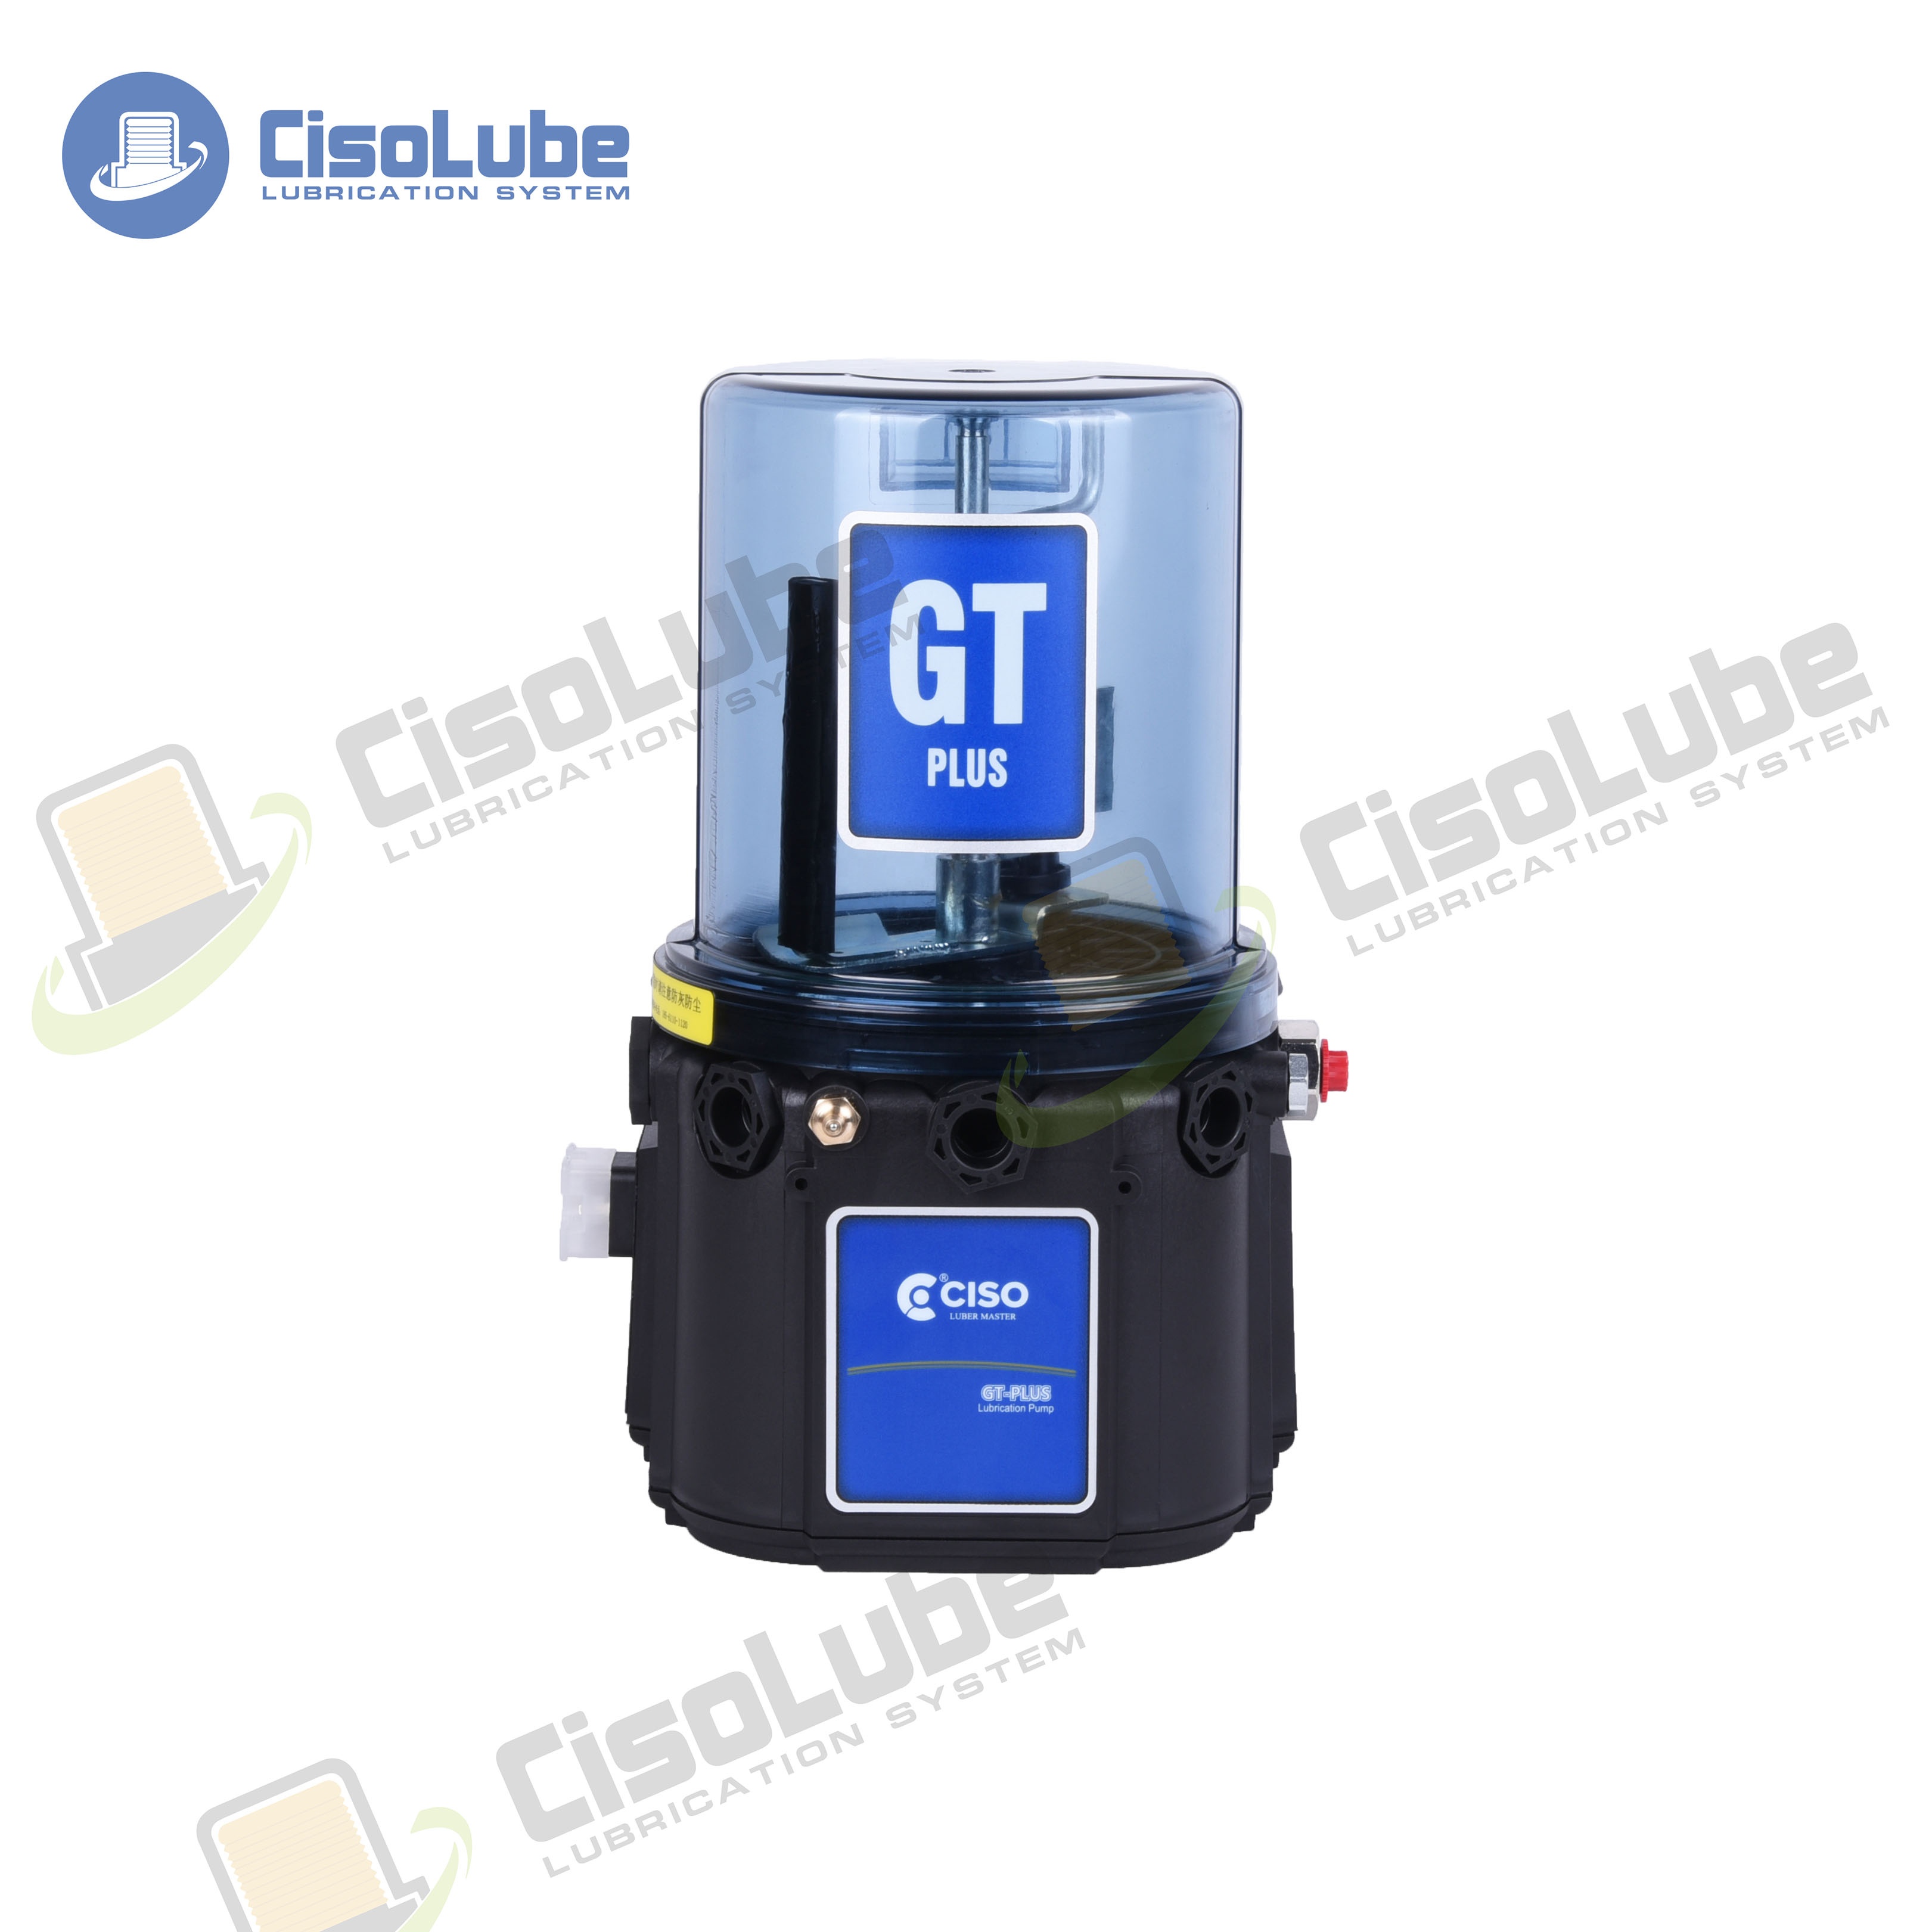 Ciso factory sells CHINA GT-PLUS type automatic grease lubrication electric pump